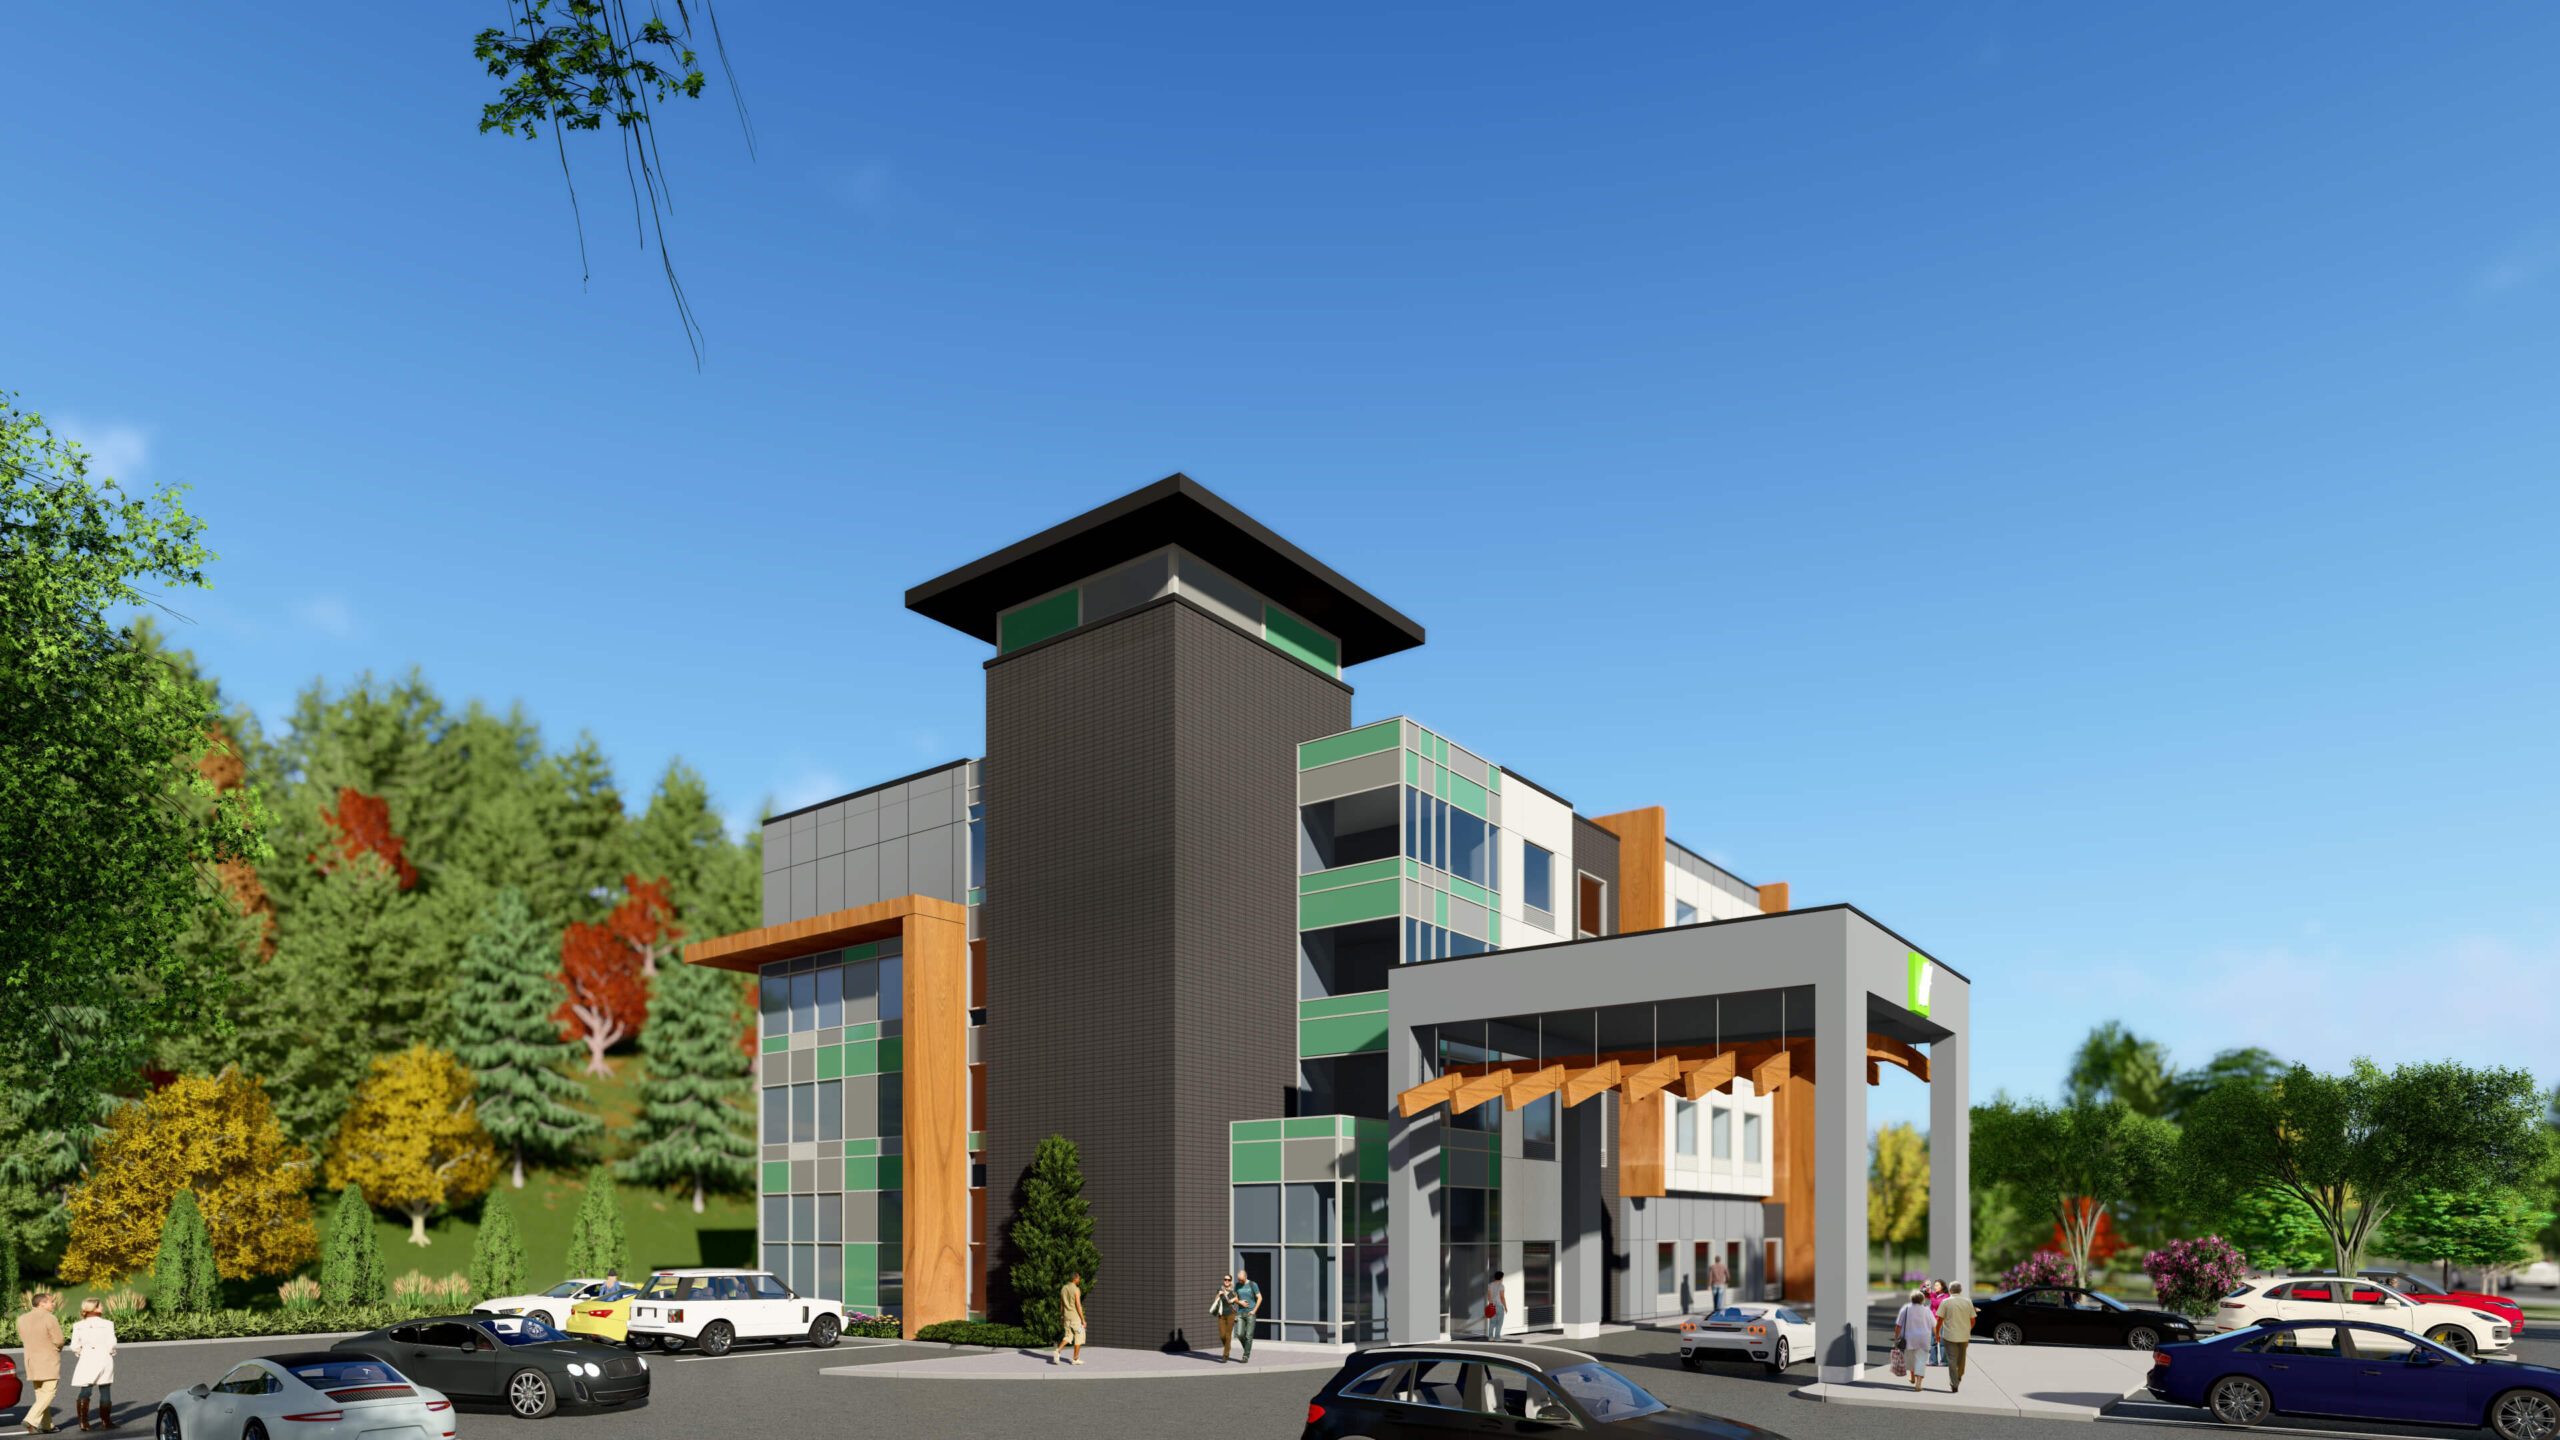 The ‘Revelstoke Hotel” development is a hospitality project located at 1859 Trans-Canada Hwy. Revelstoke, BC. Design by Group 161 | DF Architecture. Group 161, DF Architecture | ‘Revelstoke Hotel,’ Hospitality Development | Revelstoke, British Columbia, Canada